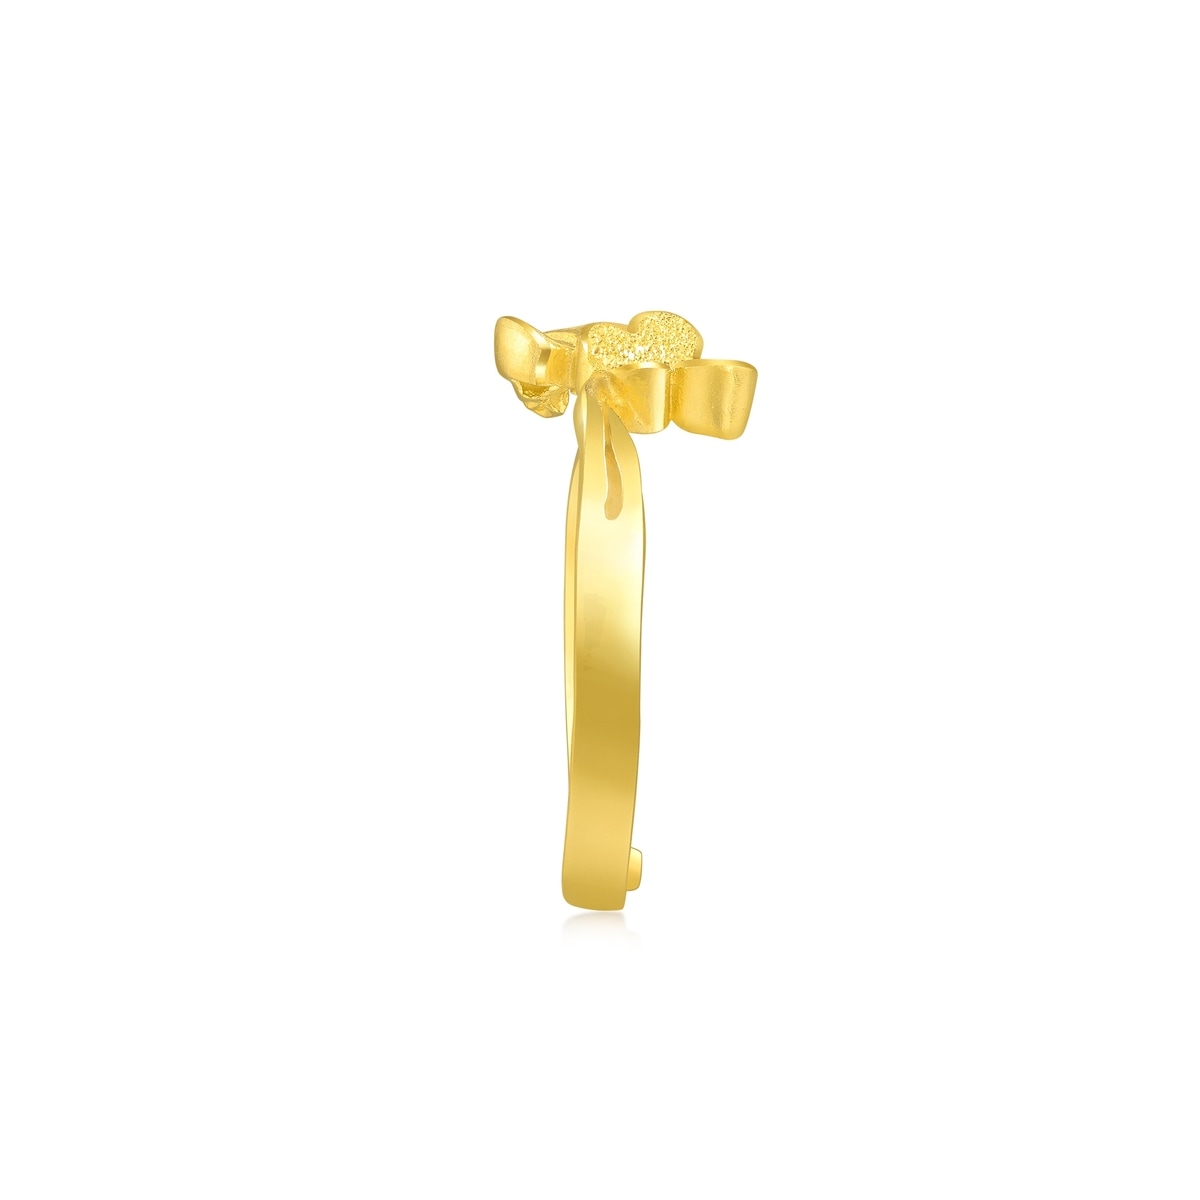 999.9 Gold Ring(220159-WT-0.0860) | Chow Sang Sang Jewellery